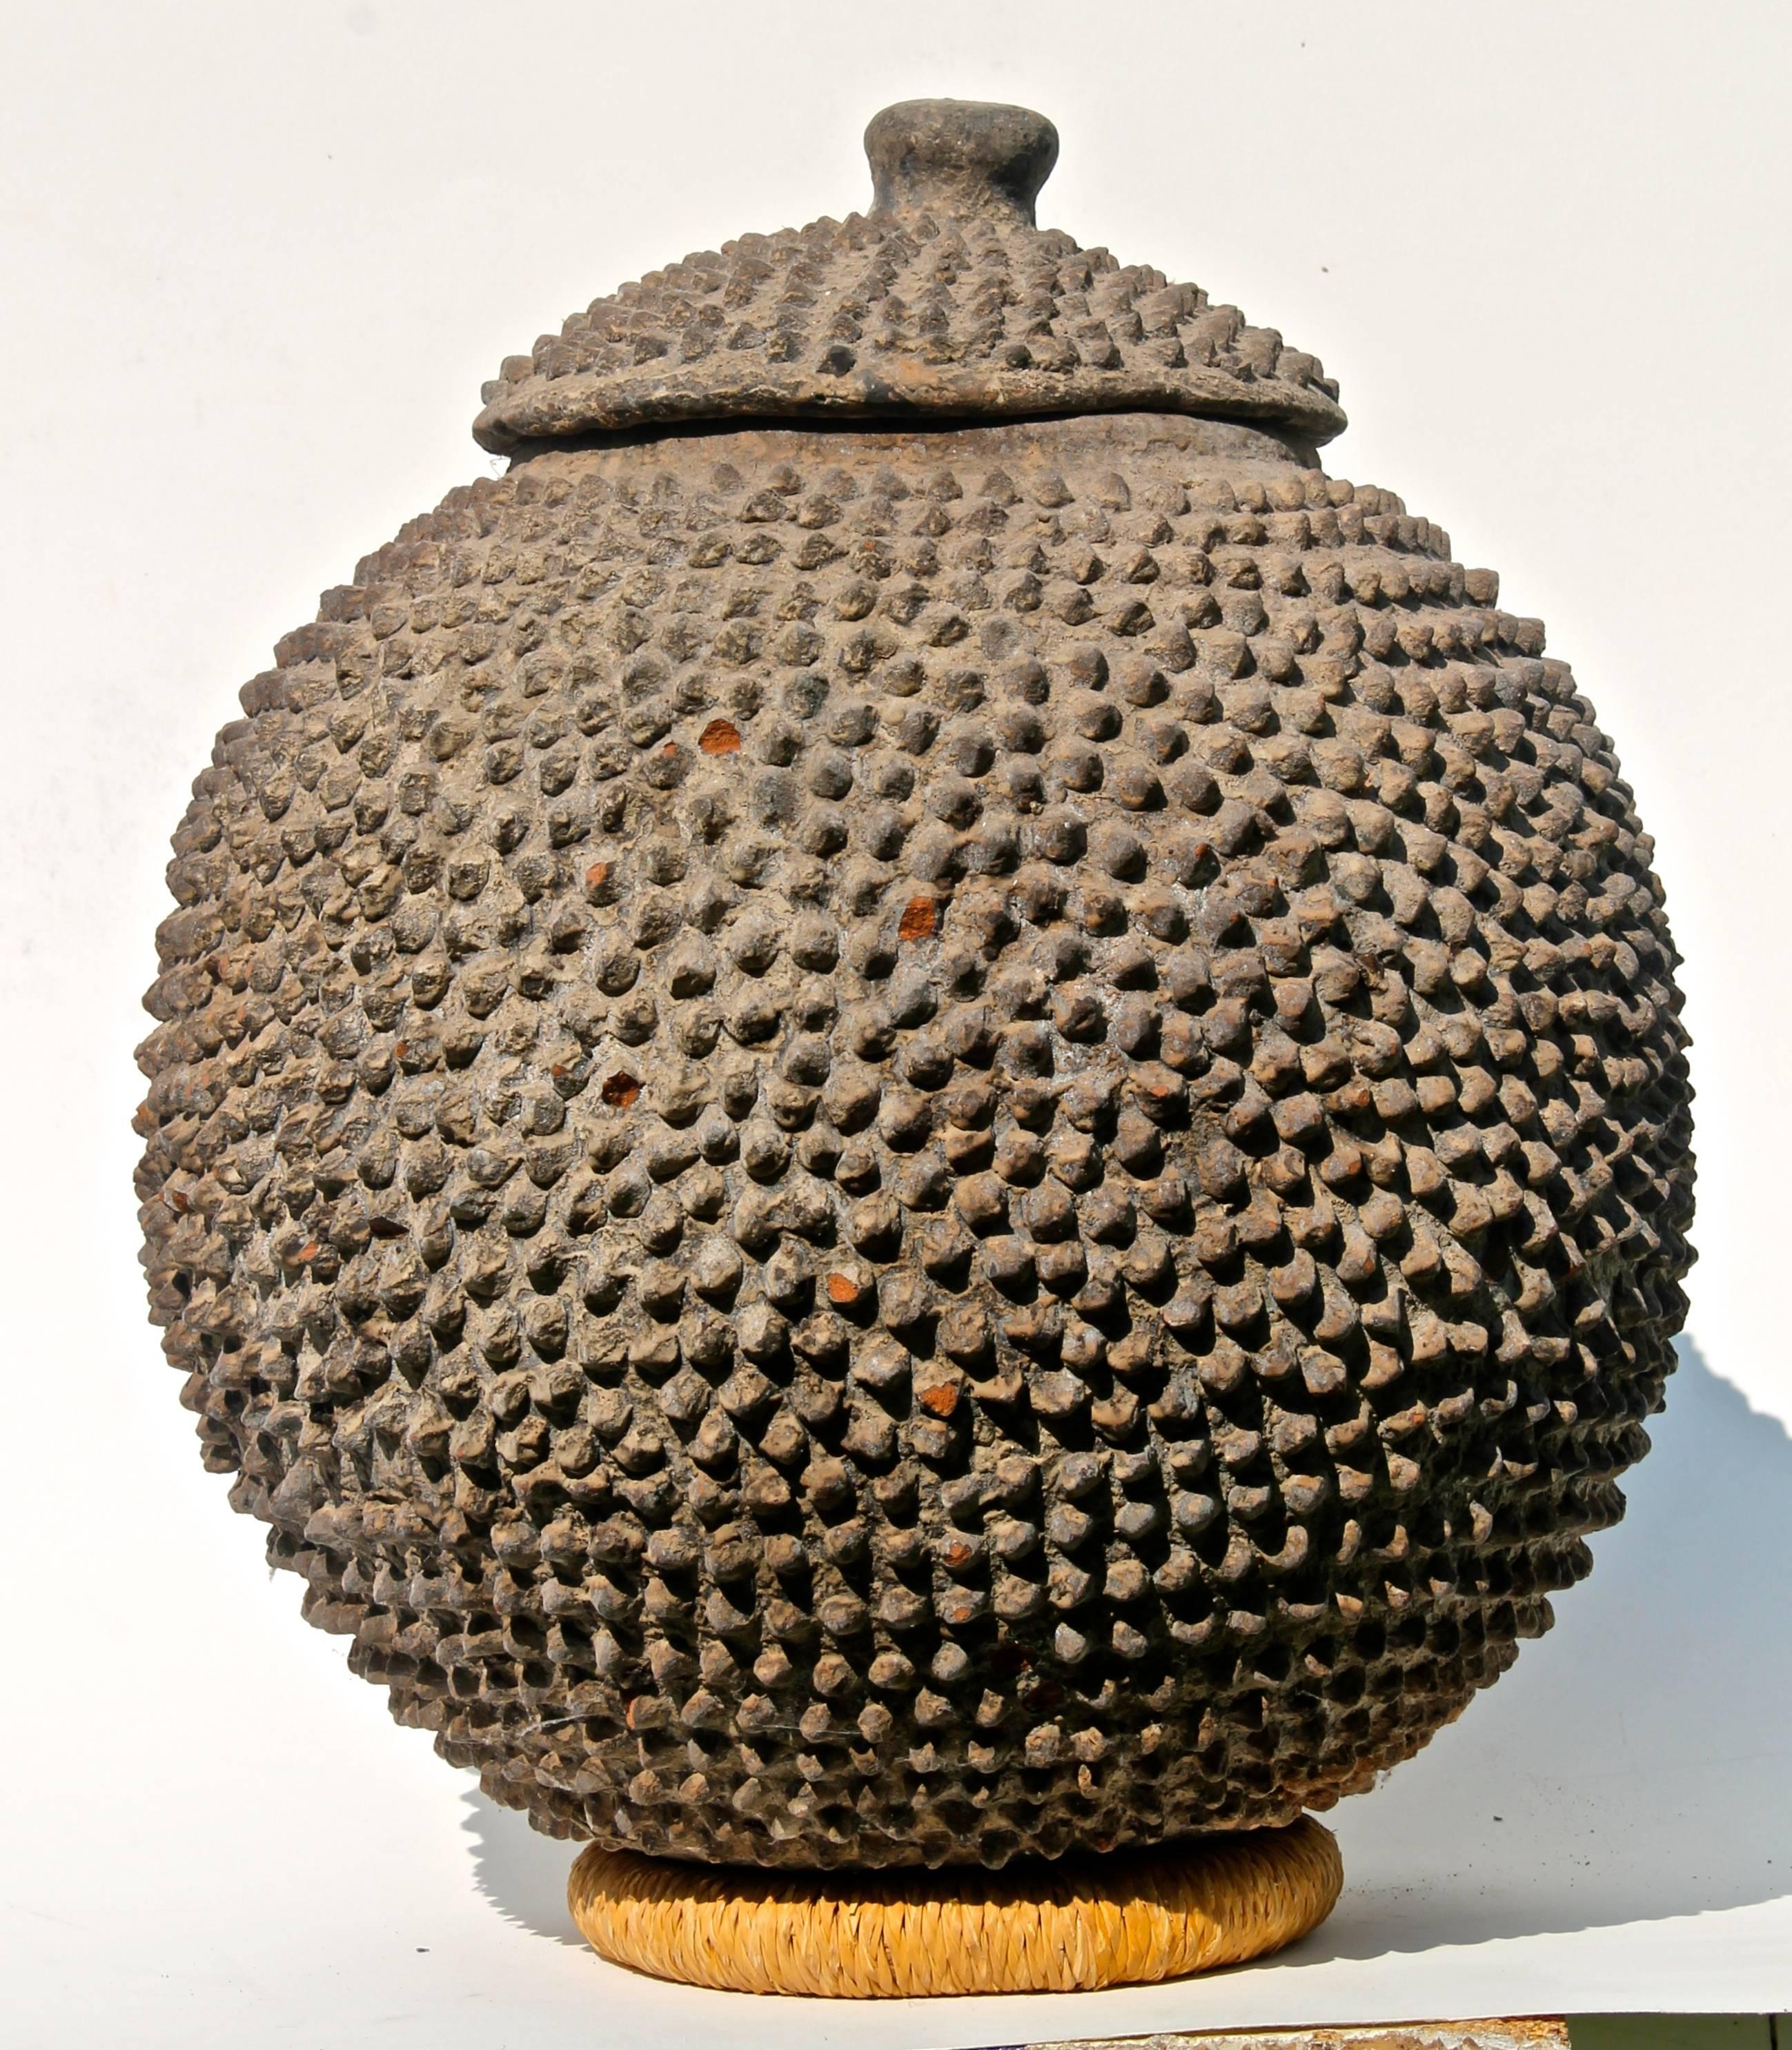 Lobi Terracotta Vessel, African Pottery For Sale at 1stdibs